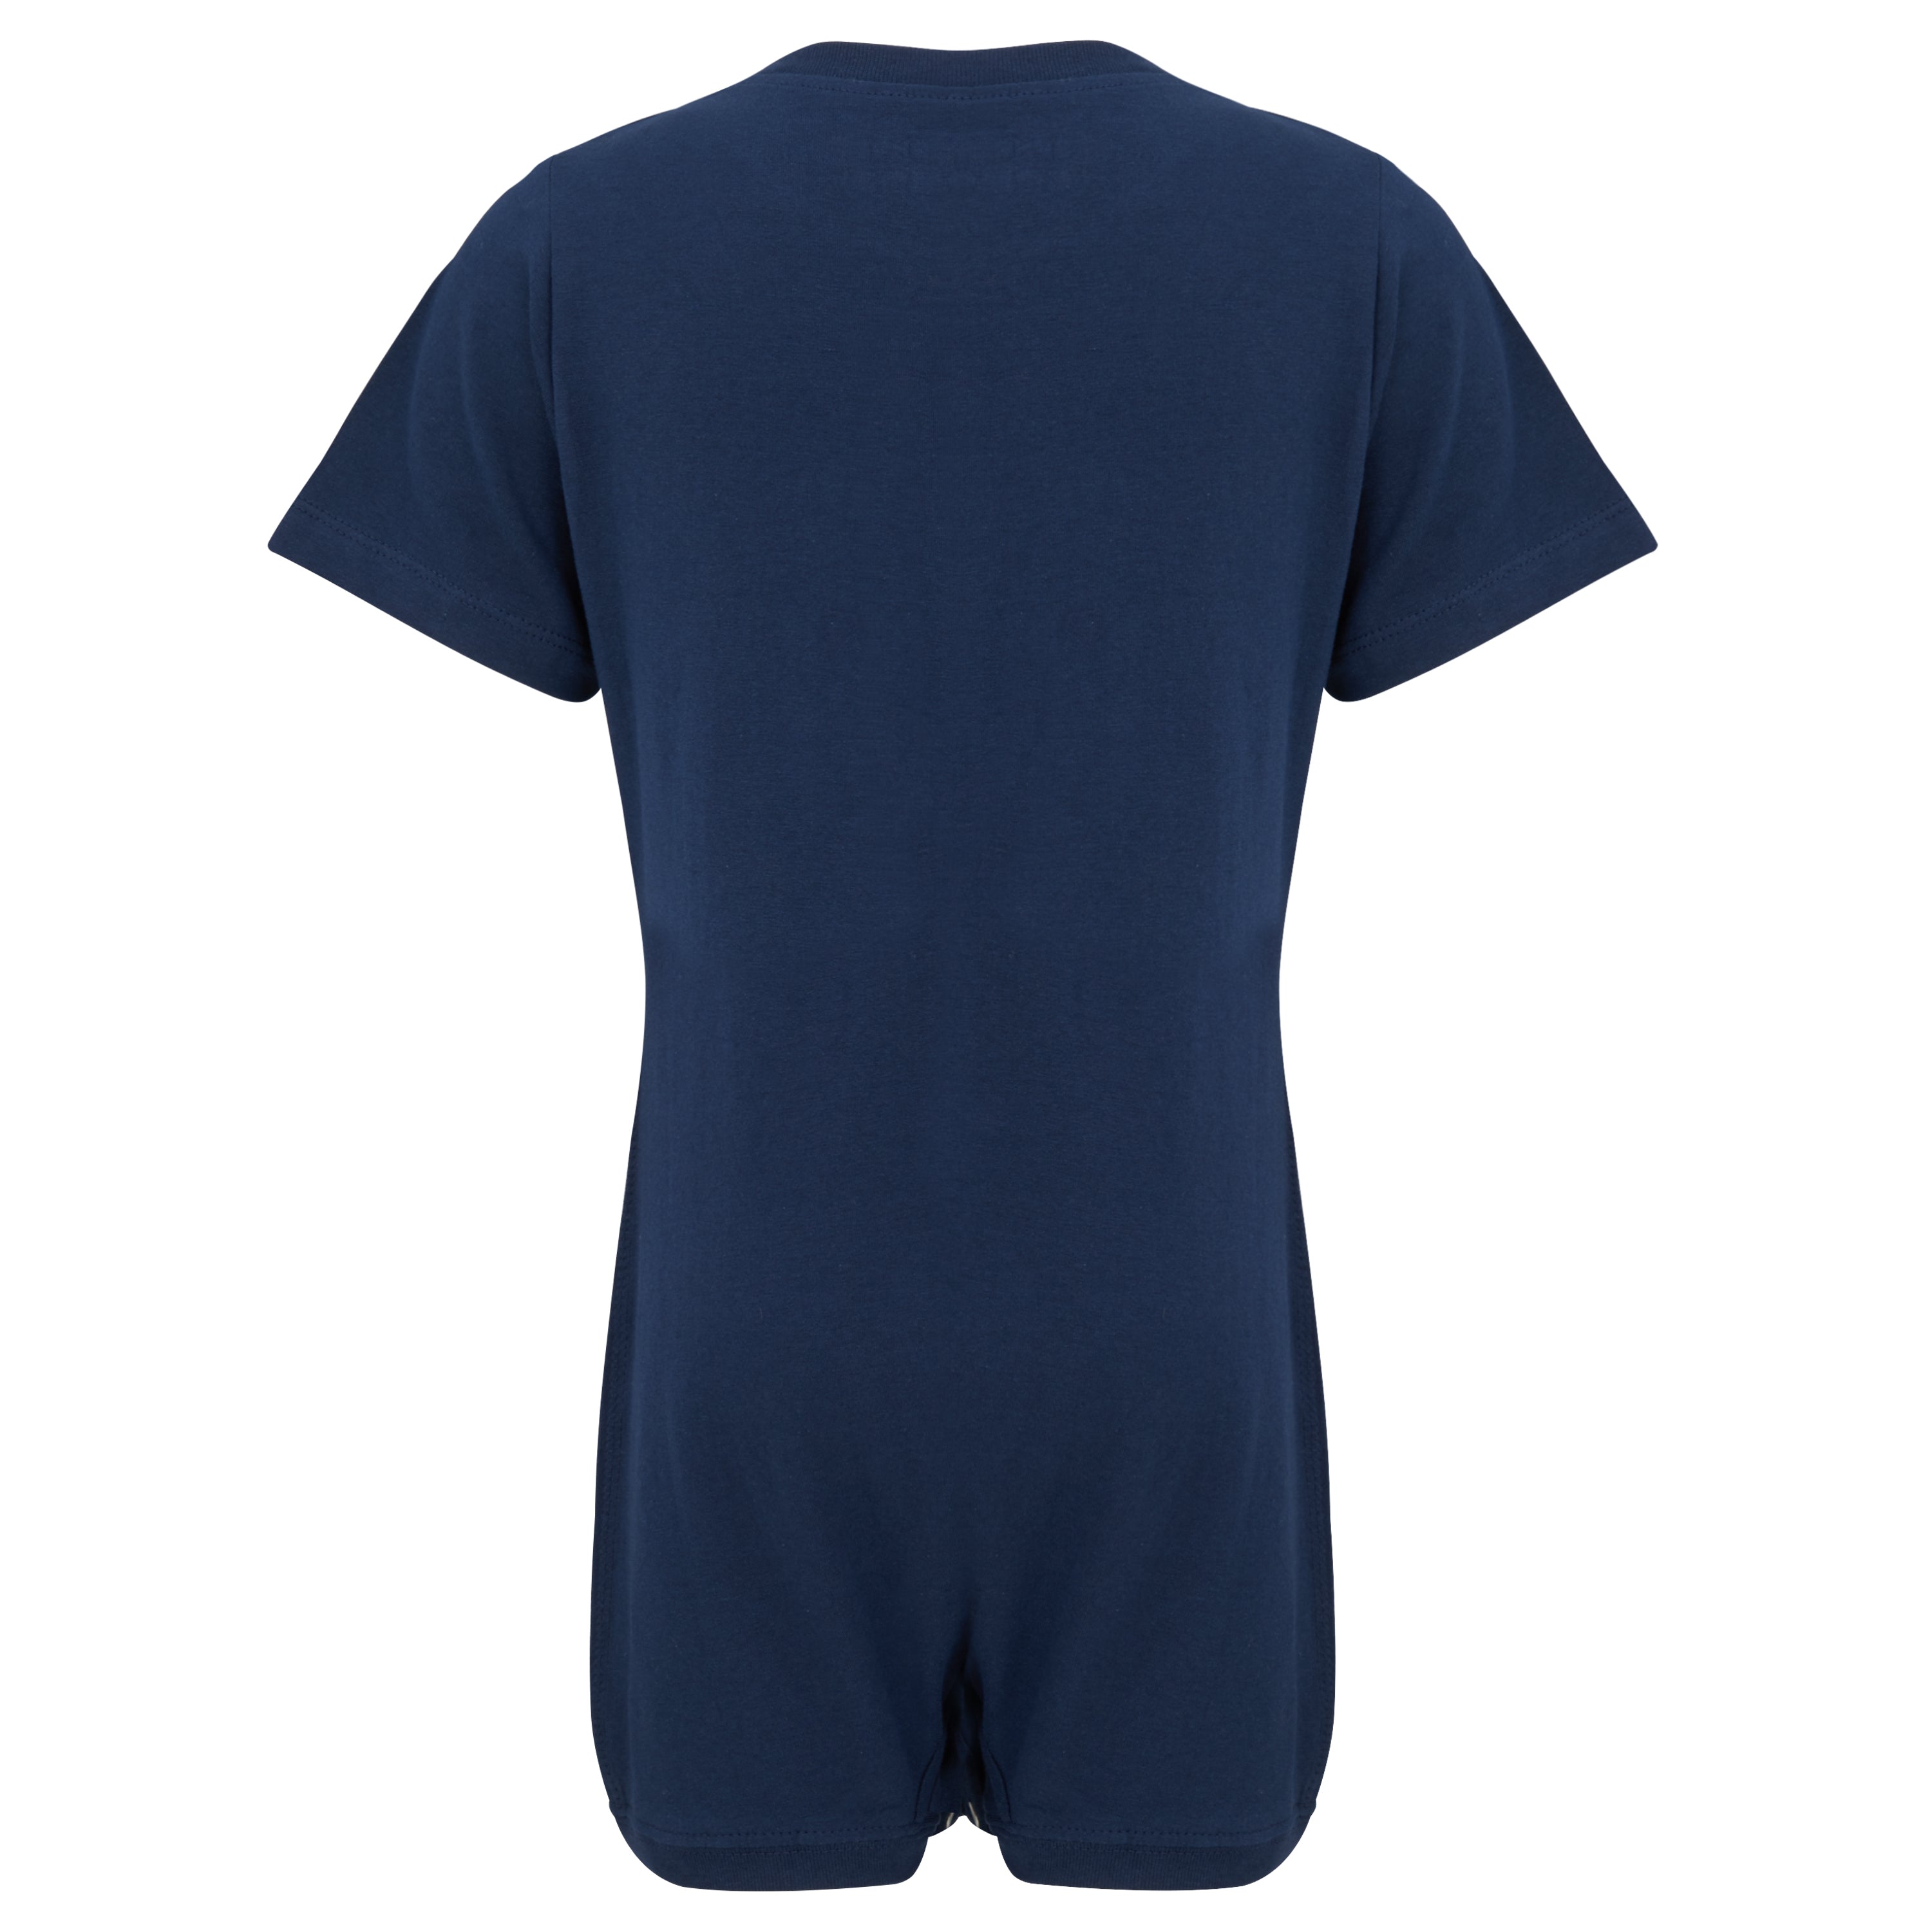 KayCey_Adaptive_clothing_for_older_children_with_special_needs_Short_Sleeve_Navy_Back